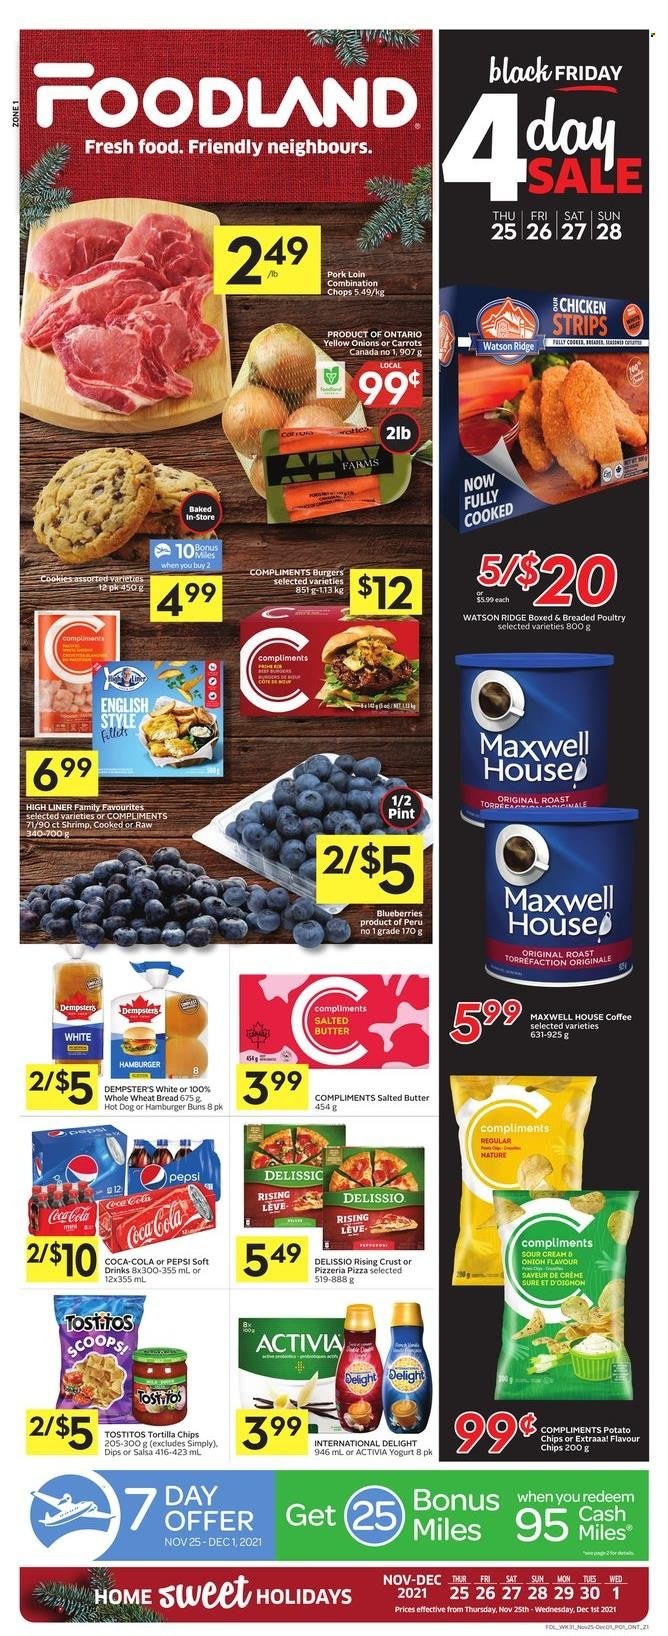 thumbnail - Foodland Flyer - November 25, 2021 - December 01, 2021 - Sales products - wheat bread, buns, burger buns, carrots, onion, blueberries, shrimps, hot dog, pizza, yoghurt, Activia, butter, salted butter, strips, chicken strips, cookies, tortilla chips, potato chips, Tostitos, salsa, Coca-Cola, Pepsi, soft drink, Maxwell House, coffee, pork loin, pork meat, chips. Page 1.